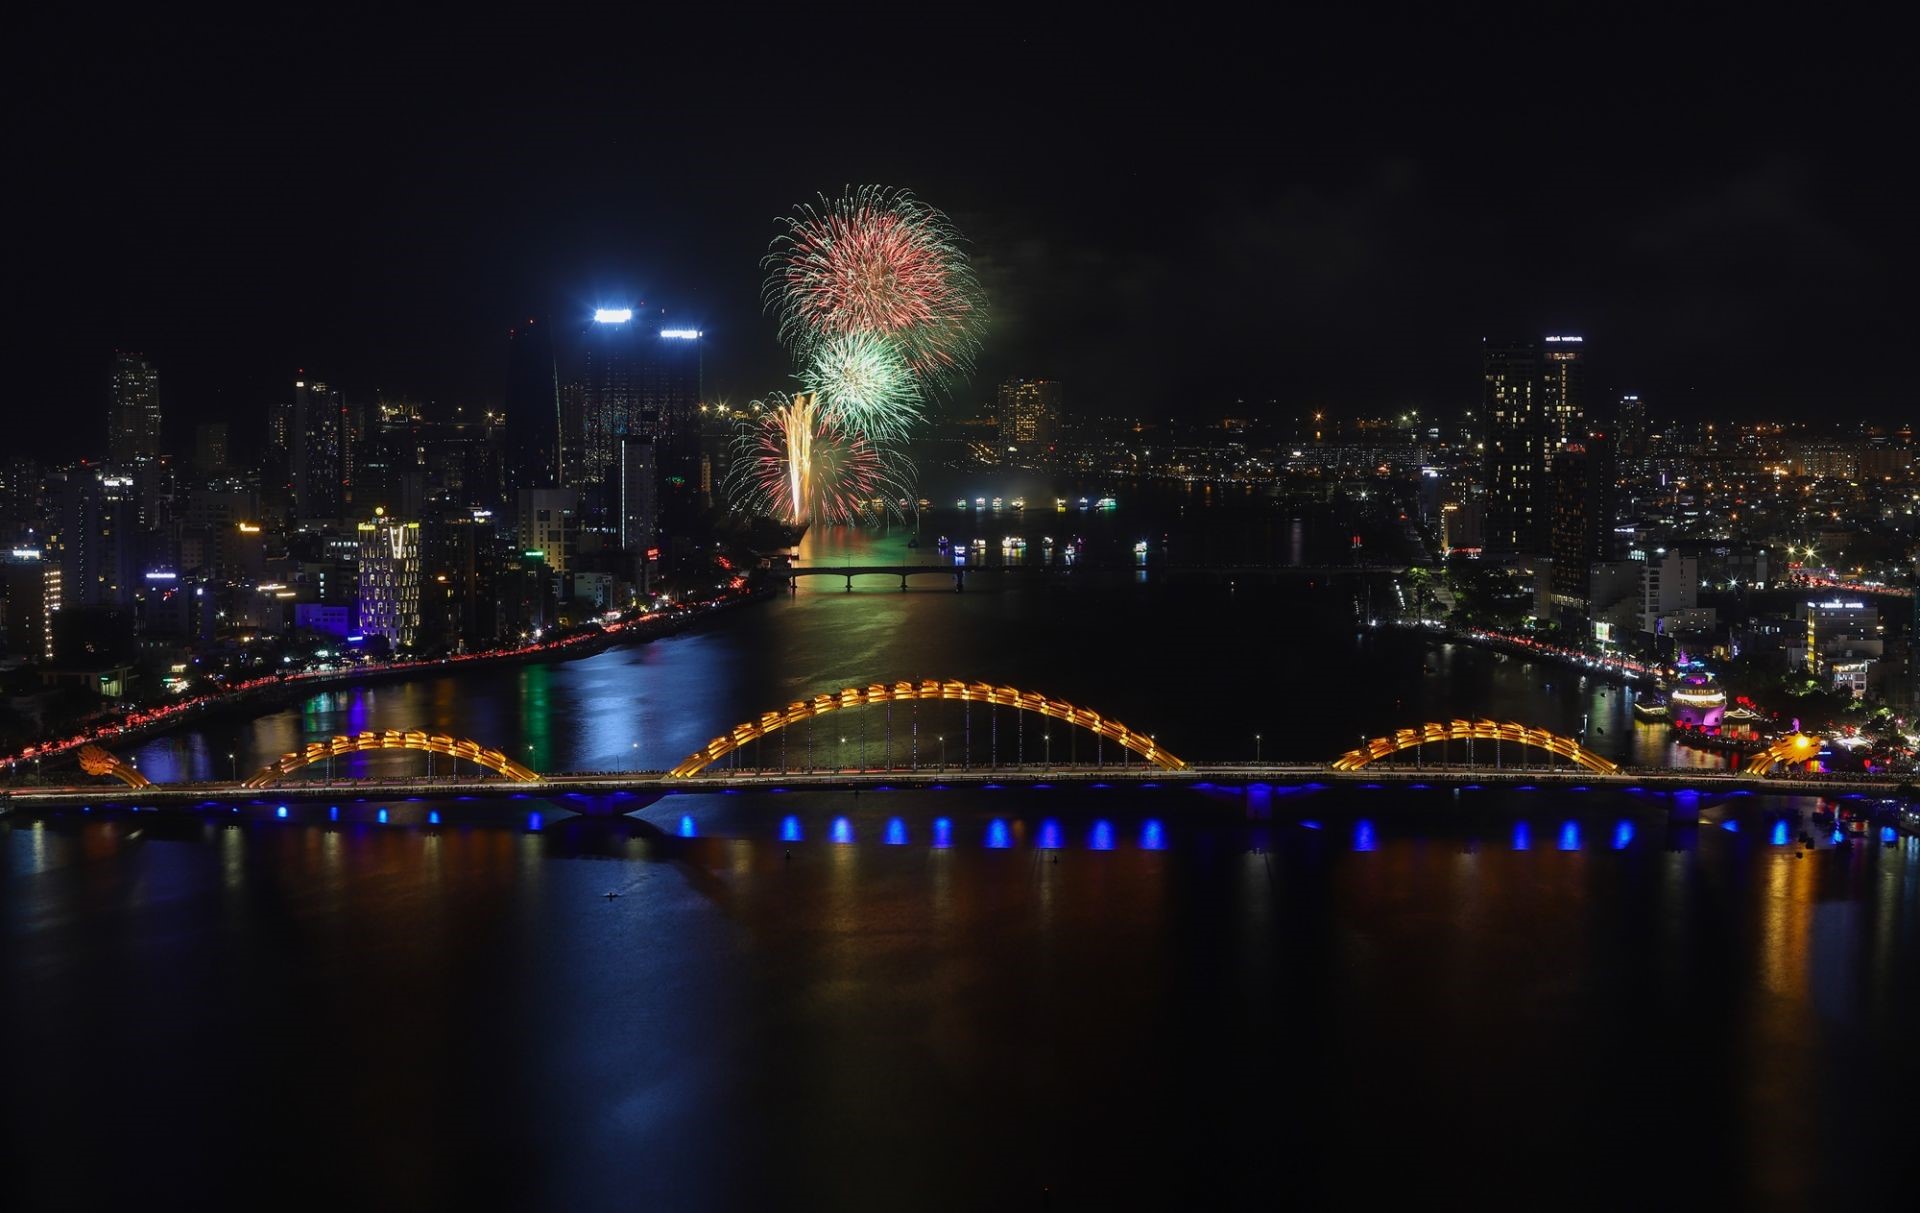 Danang International Fireworks Festival - DIFF 2023 organized by the Danang People's Committee in collaboration with Sun Group has officially returned.